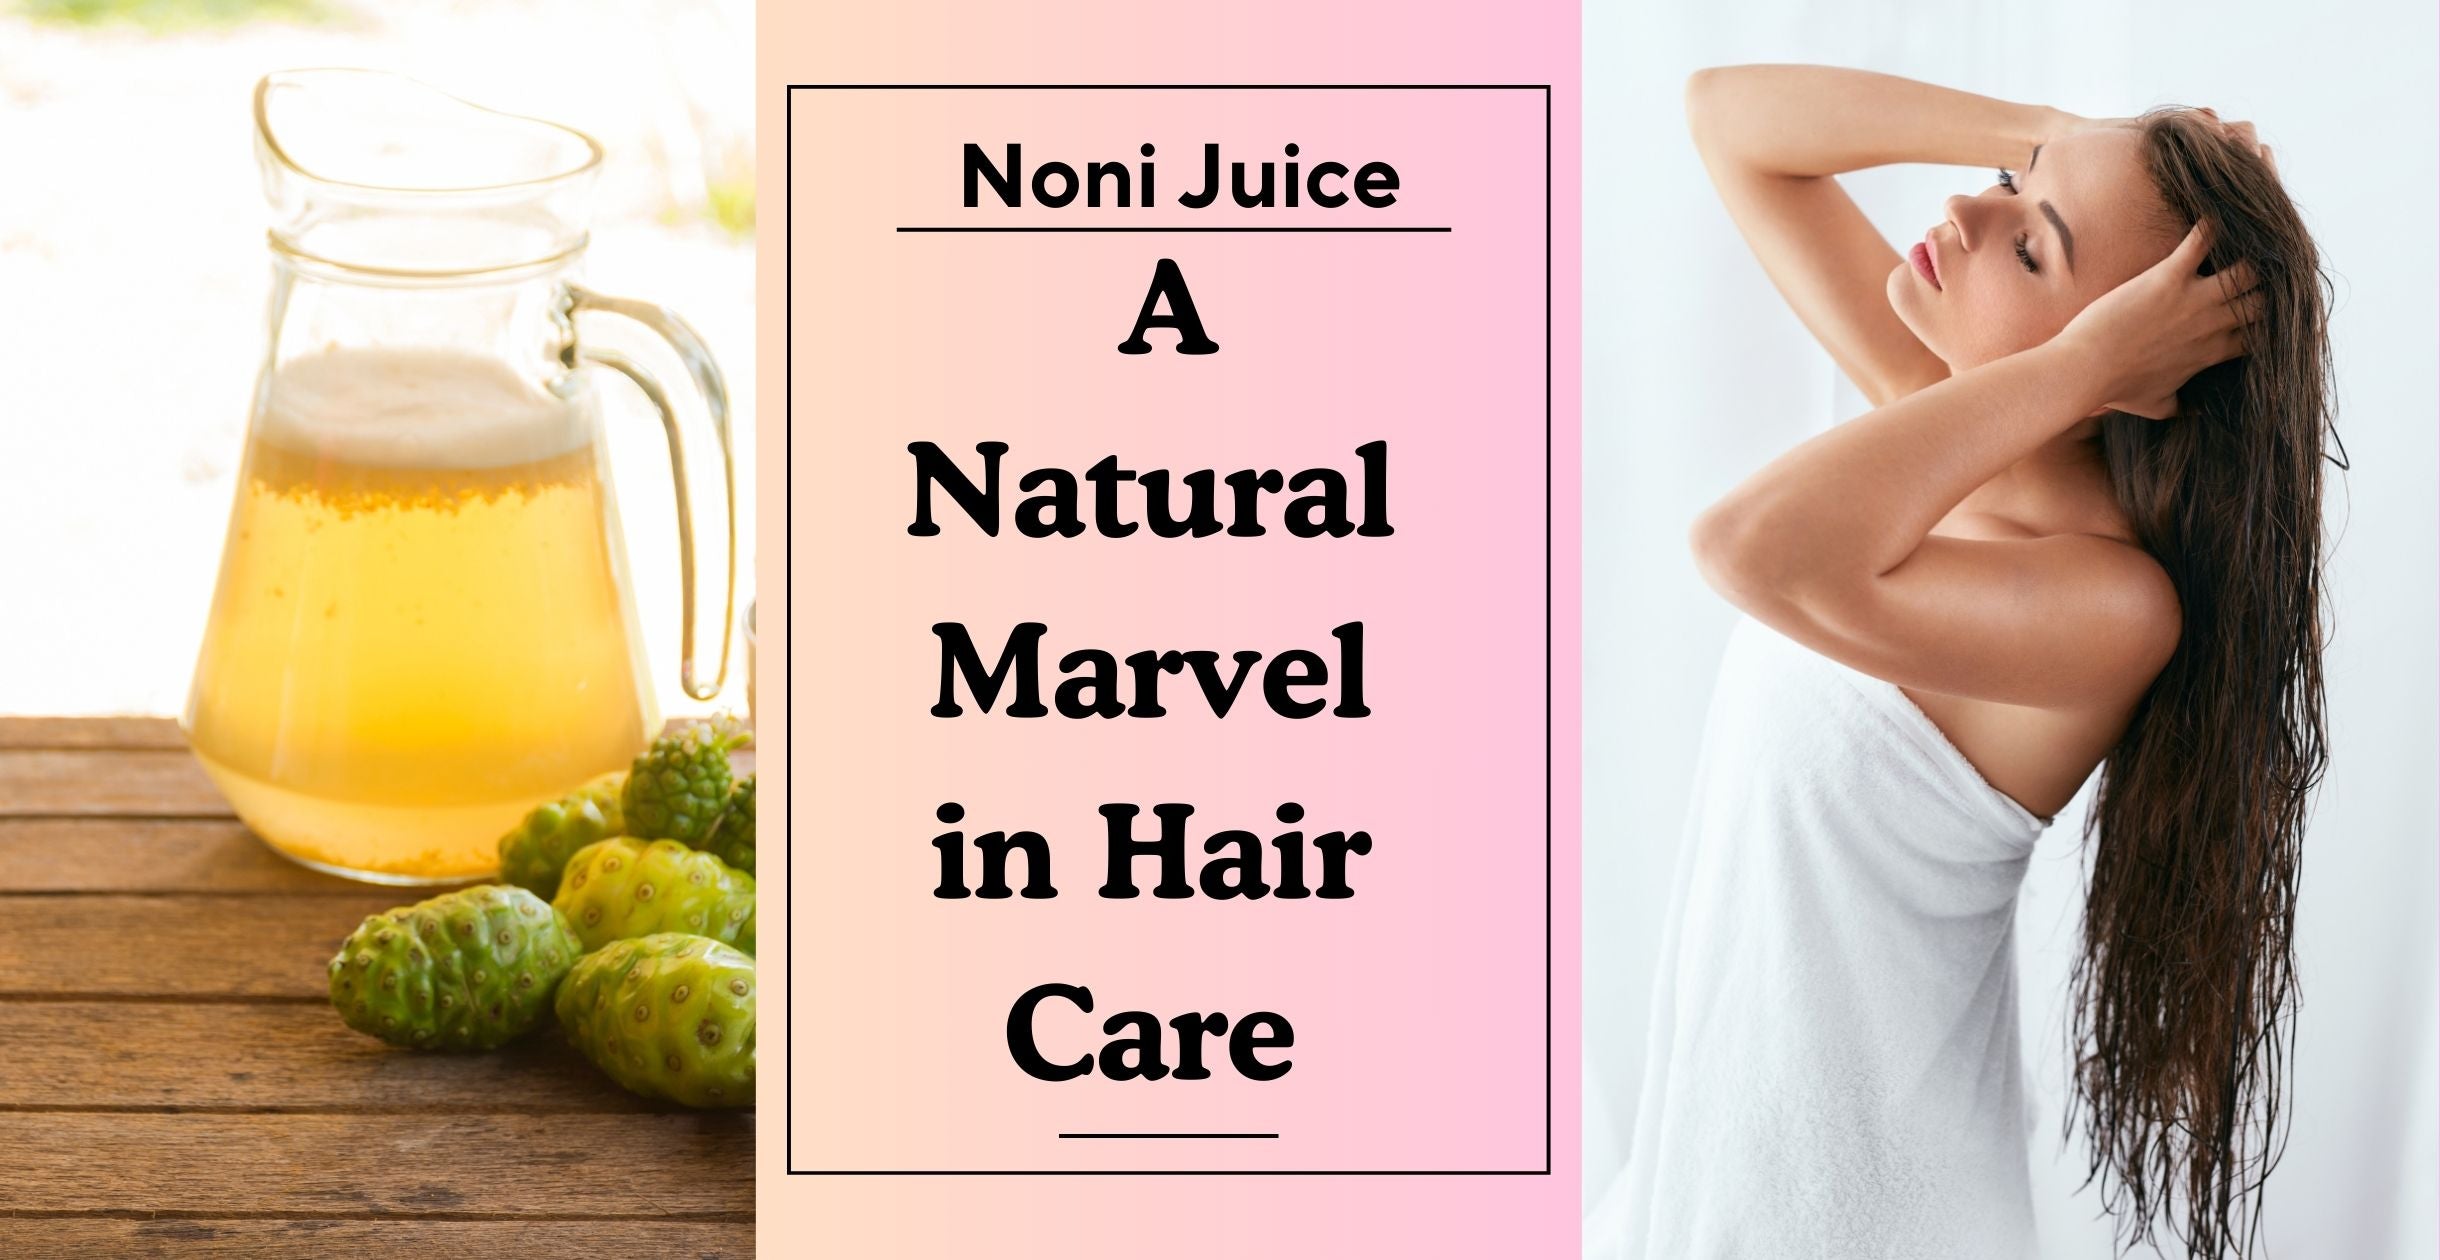 Noni Juice: A Natural Marvel in Hair Care